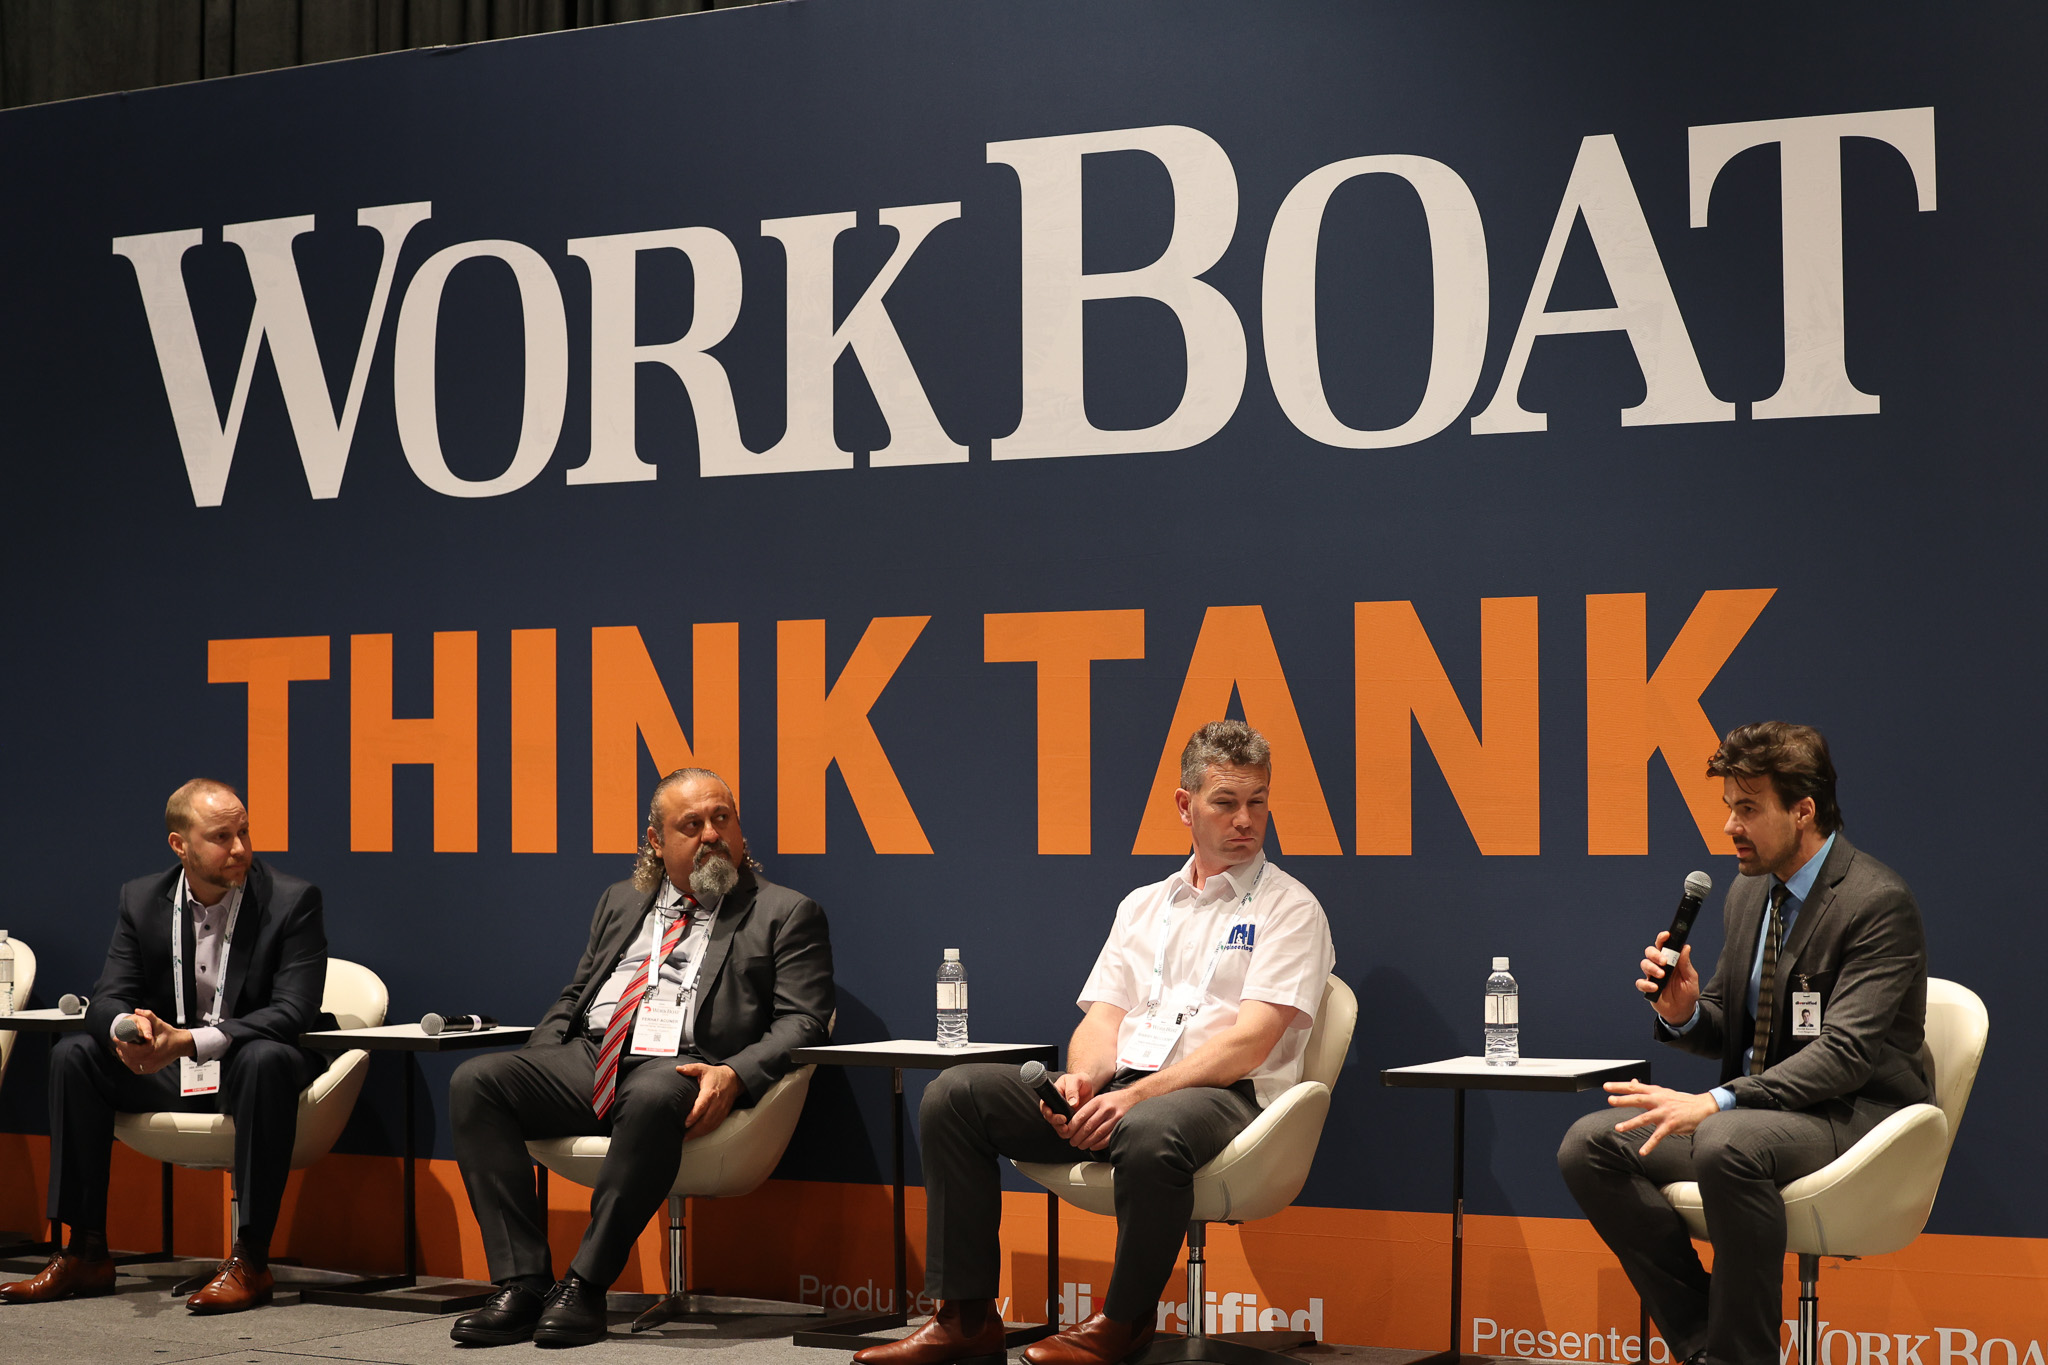 WorkBoat Show Think Tank Innovative new products highlighted WorkBoat